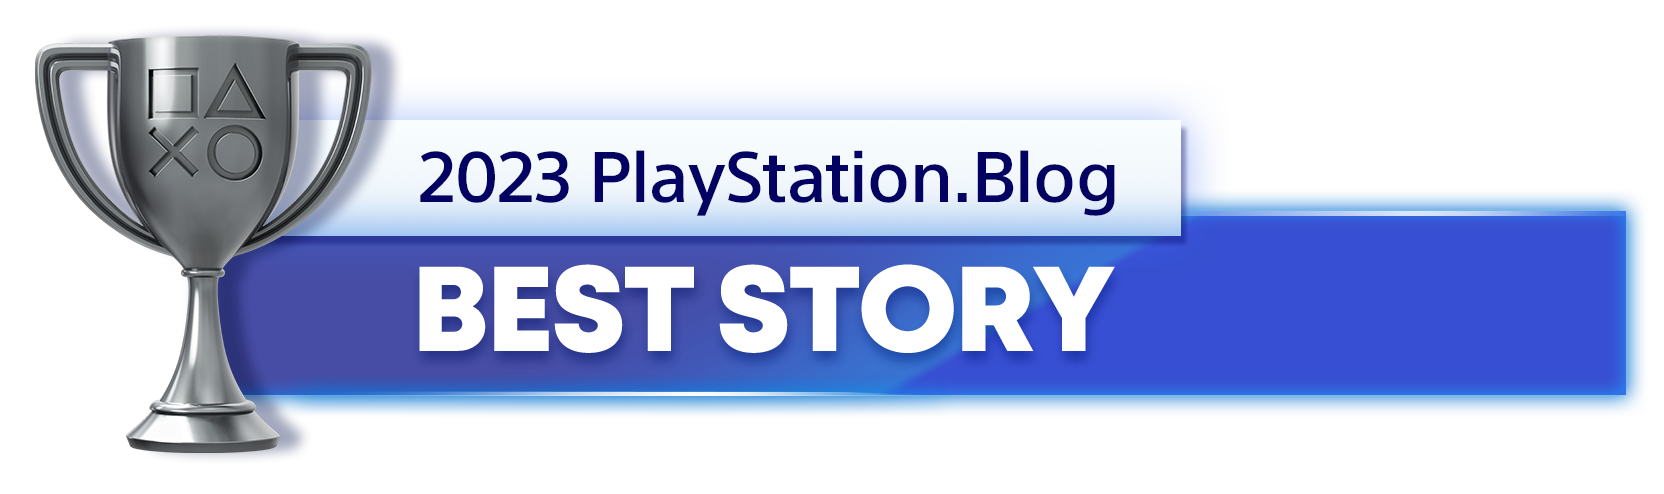  "Silver Trophy for the 2023 PlayStation Blog Best Story Winner"